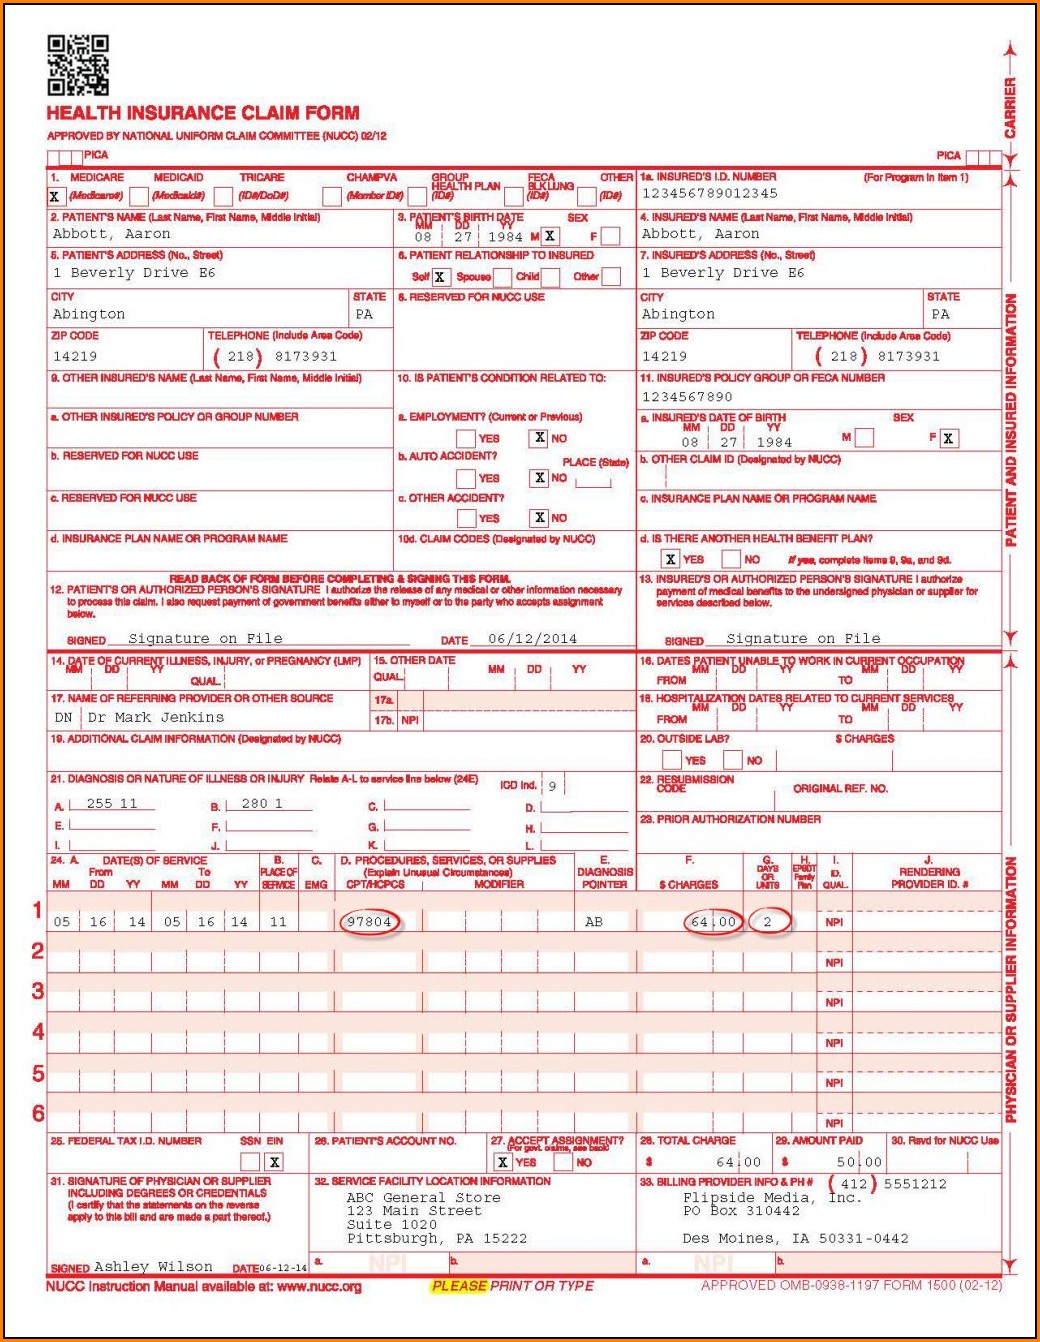 Completed Cms 1500 Form Sample